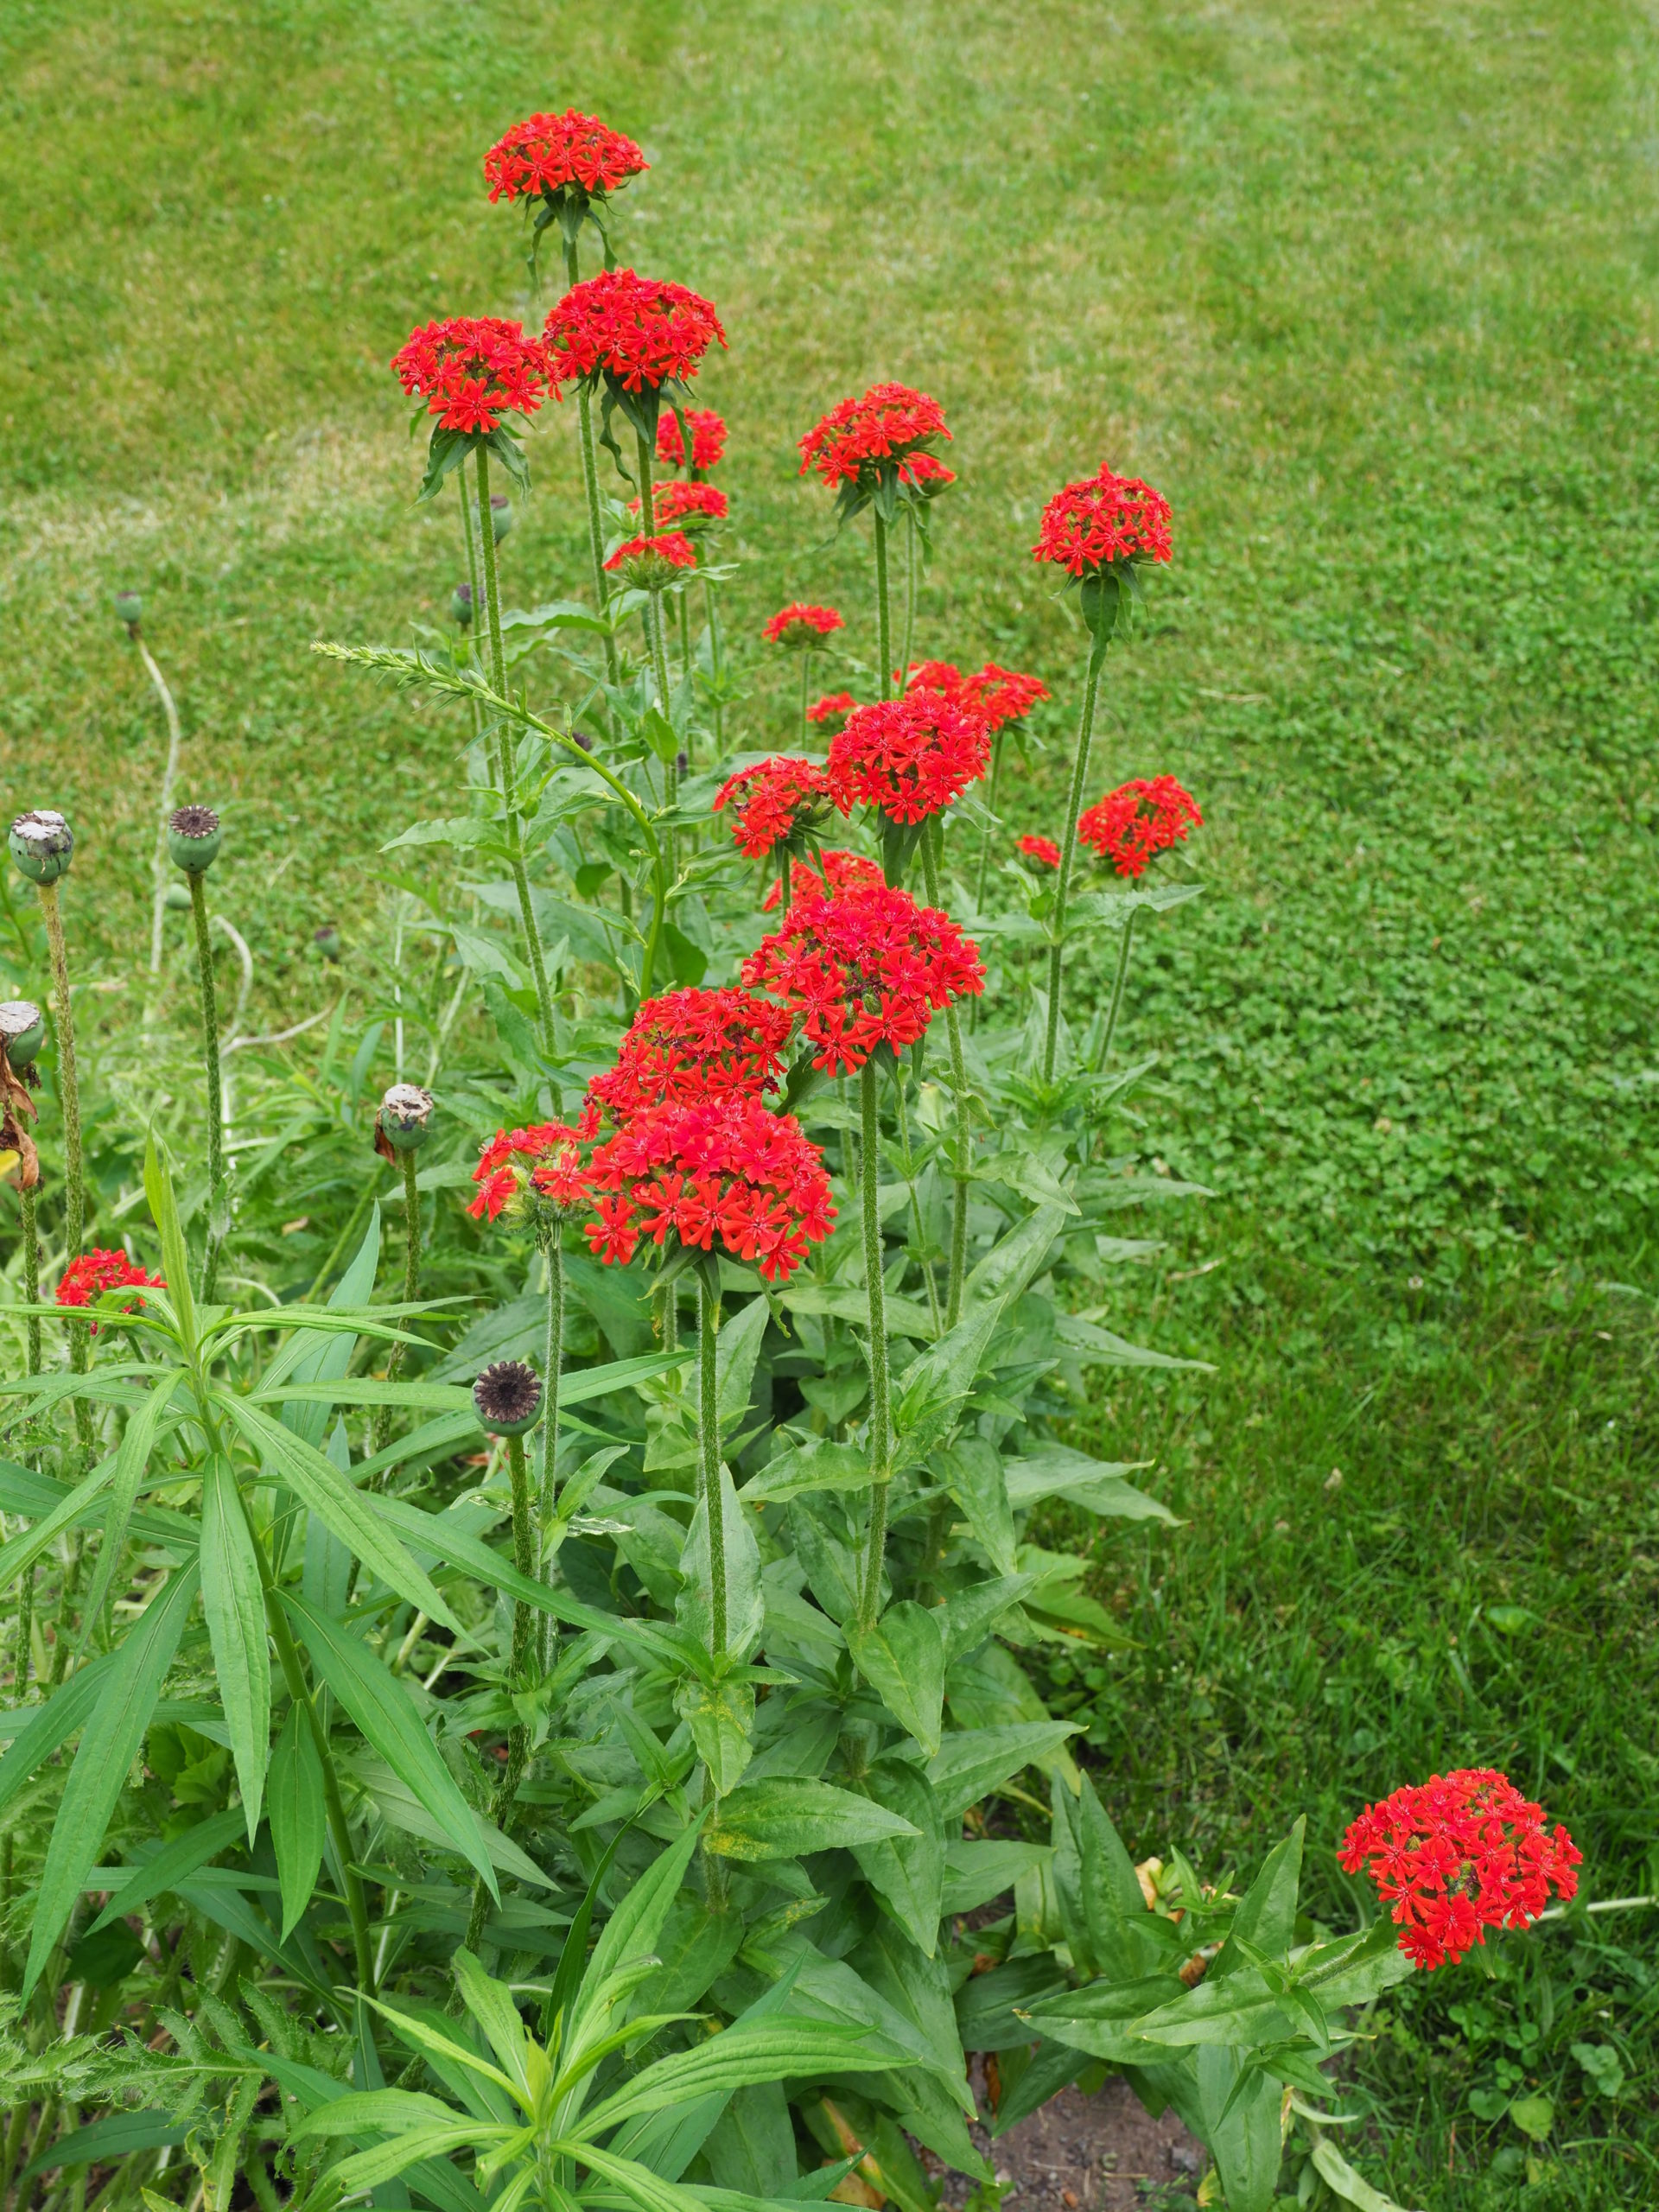 The poppies having faded and left their seed heads atop the flower stems the Lychnis chalcedonica (Maltese cross) begins to fill in and continue the brilliant color display.